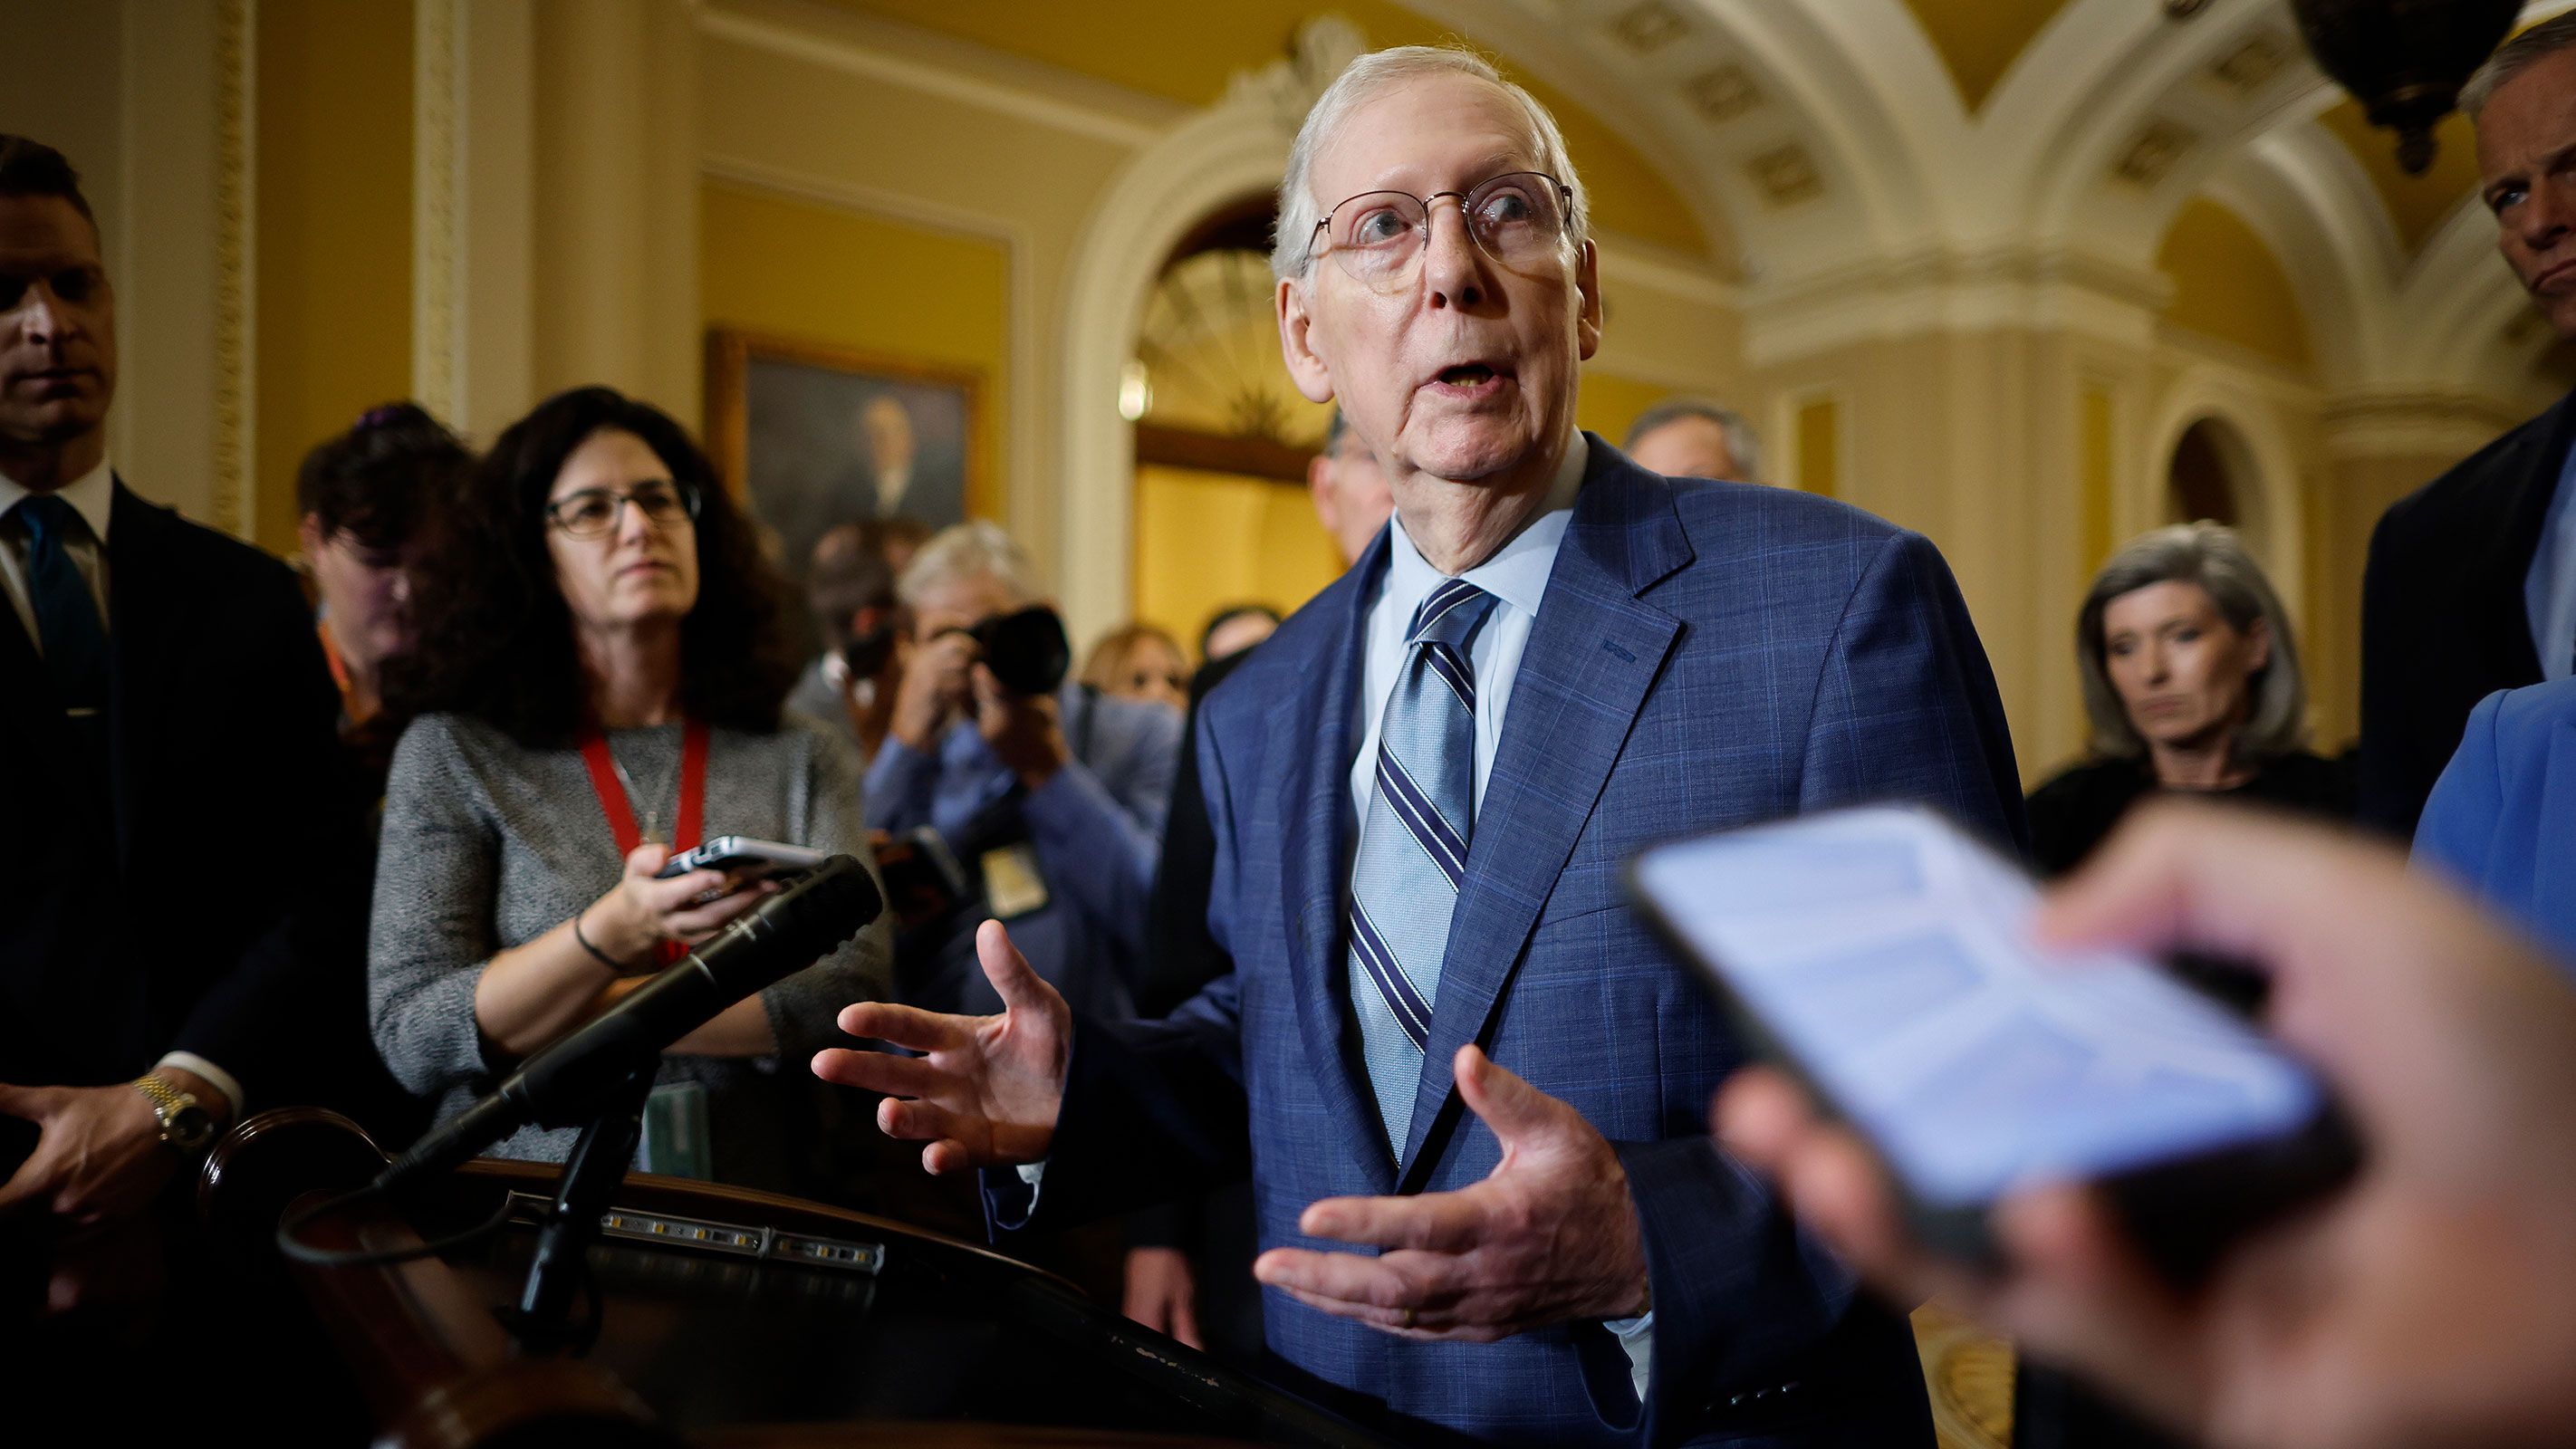 Senate Minority Leader Mitch McConnell talks to reporters following the weekly Republican Senate policy luncheon meeting at the Capitol on September 12 in Washington, DC. 